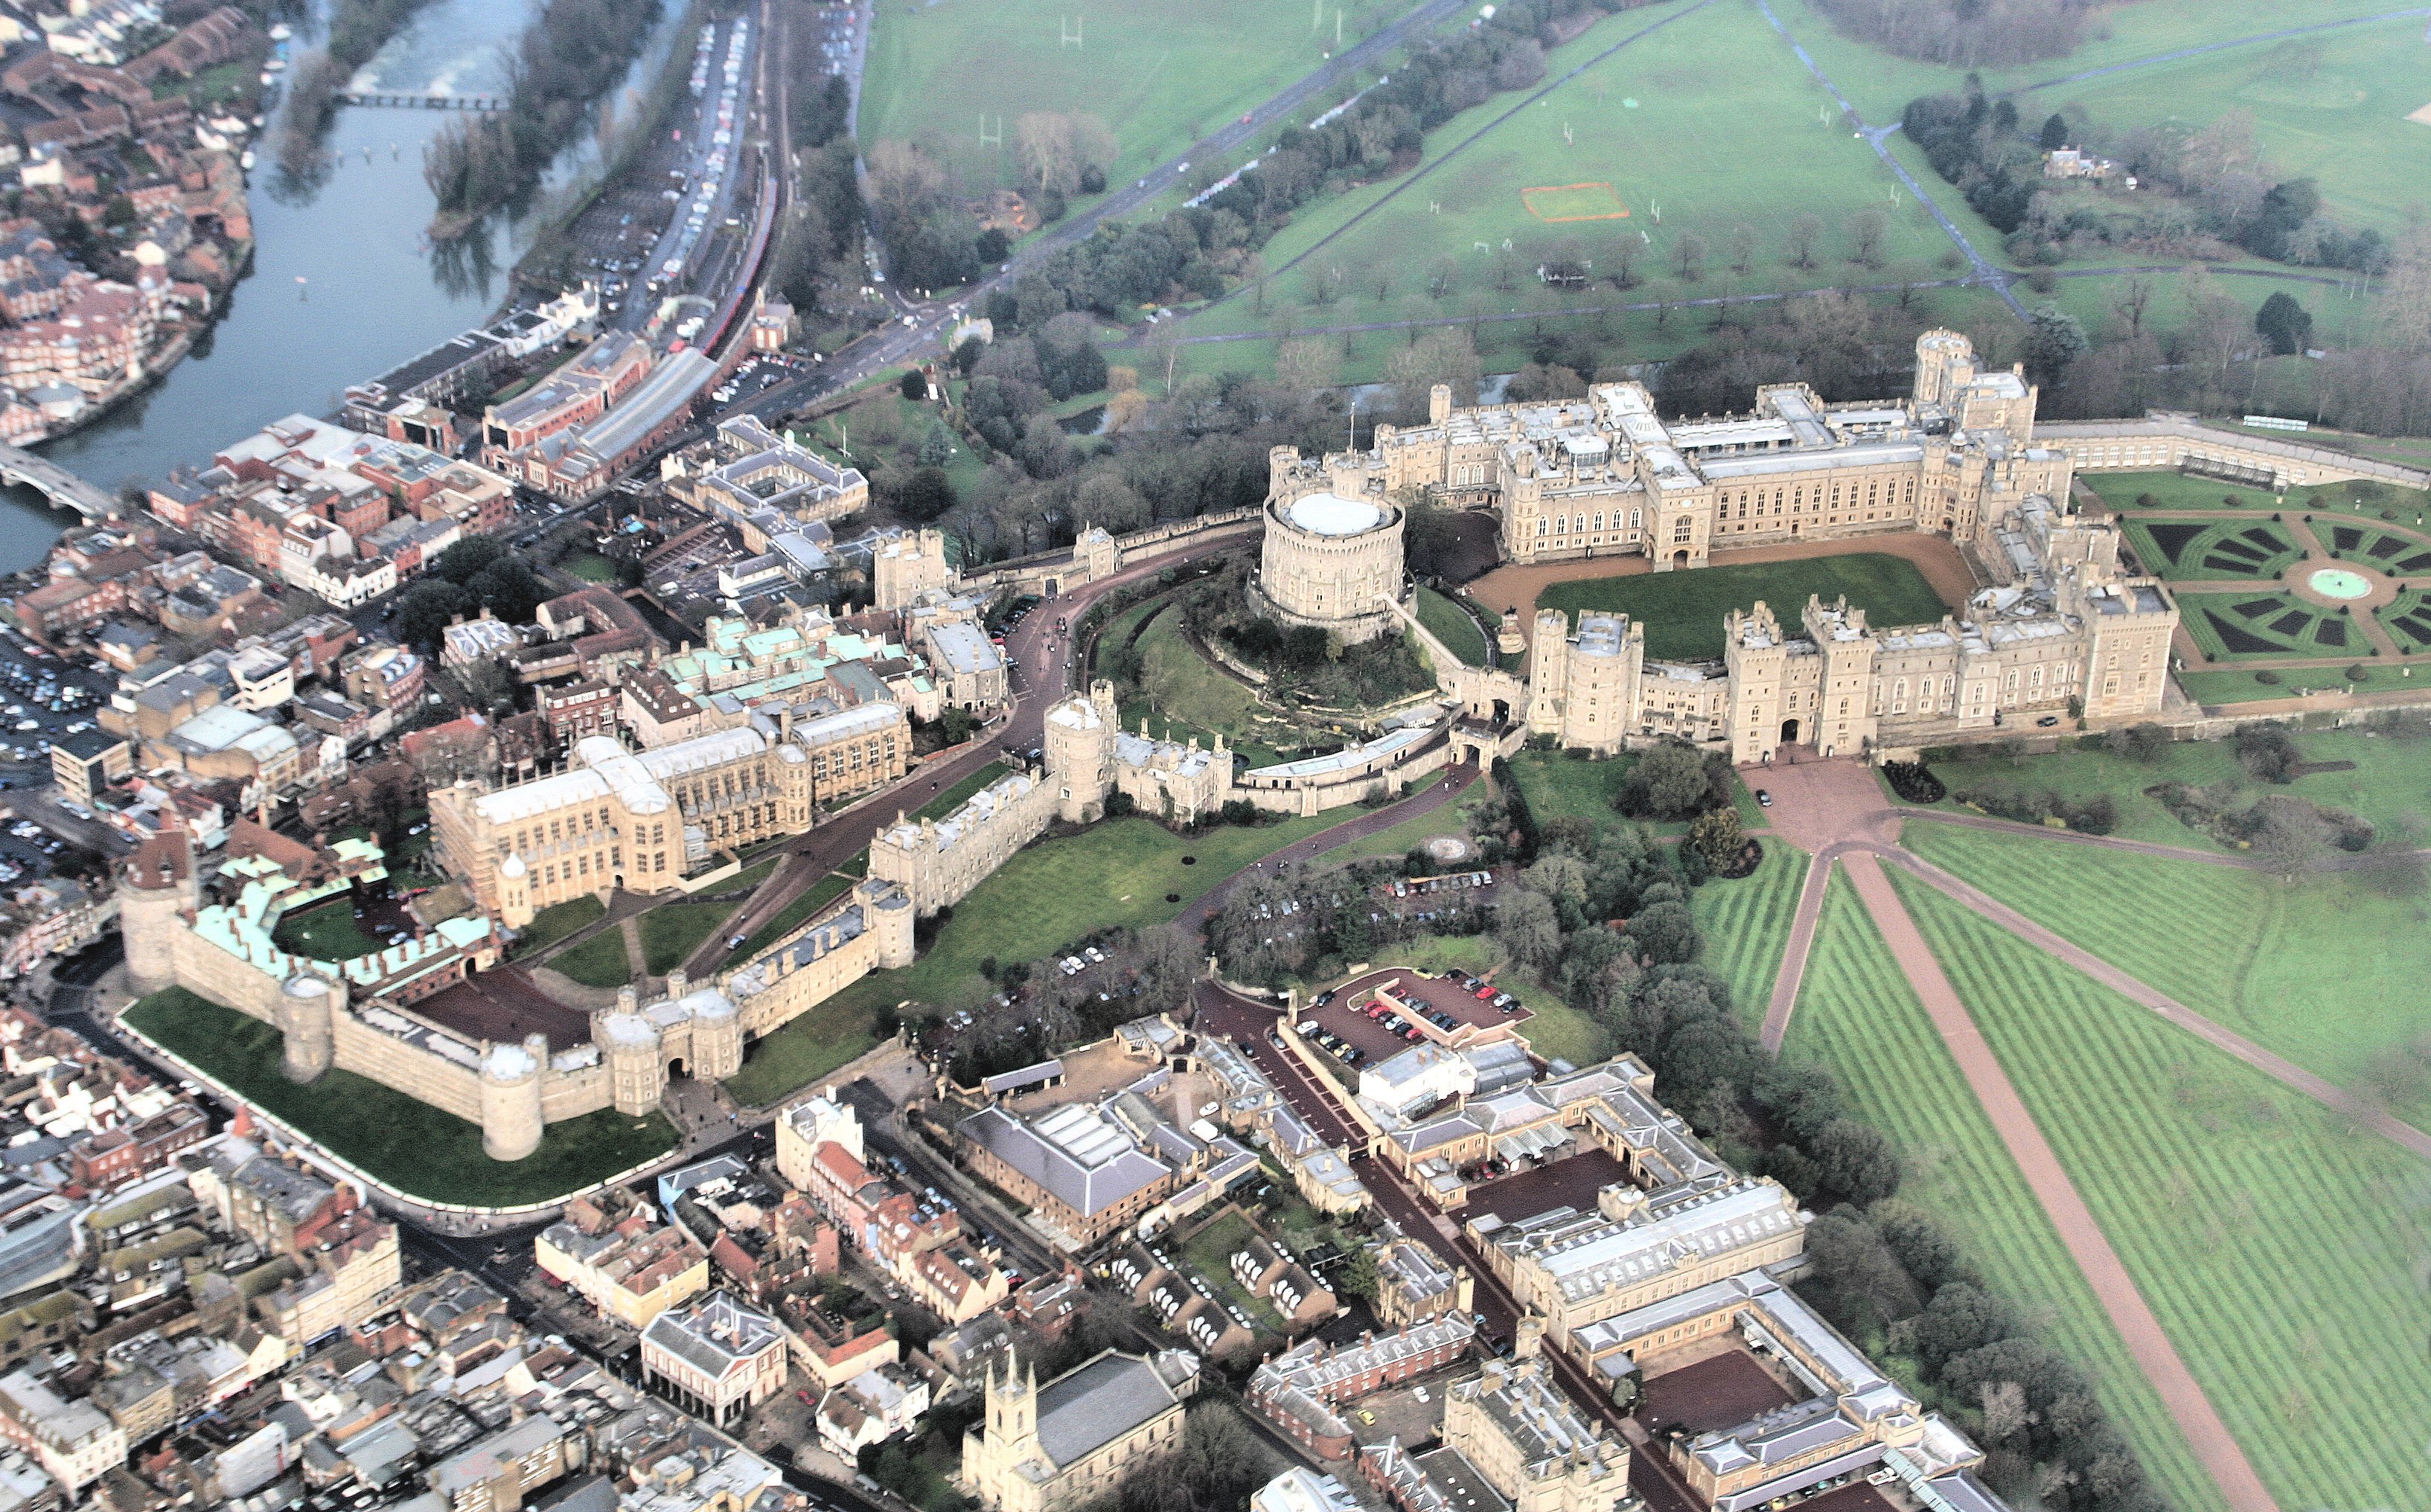 Aerial photo of the Royal Castle at Windsor | Source: Getty Images